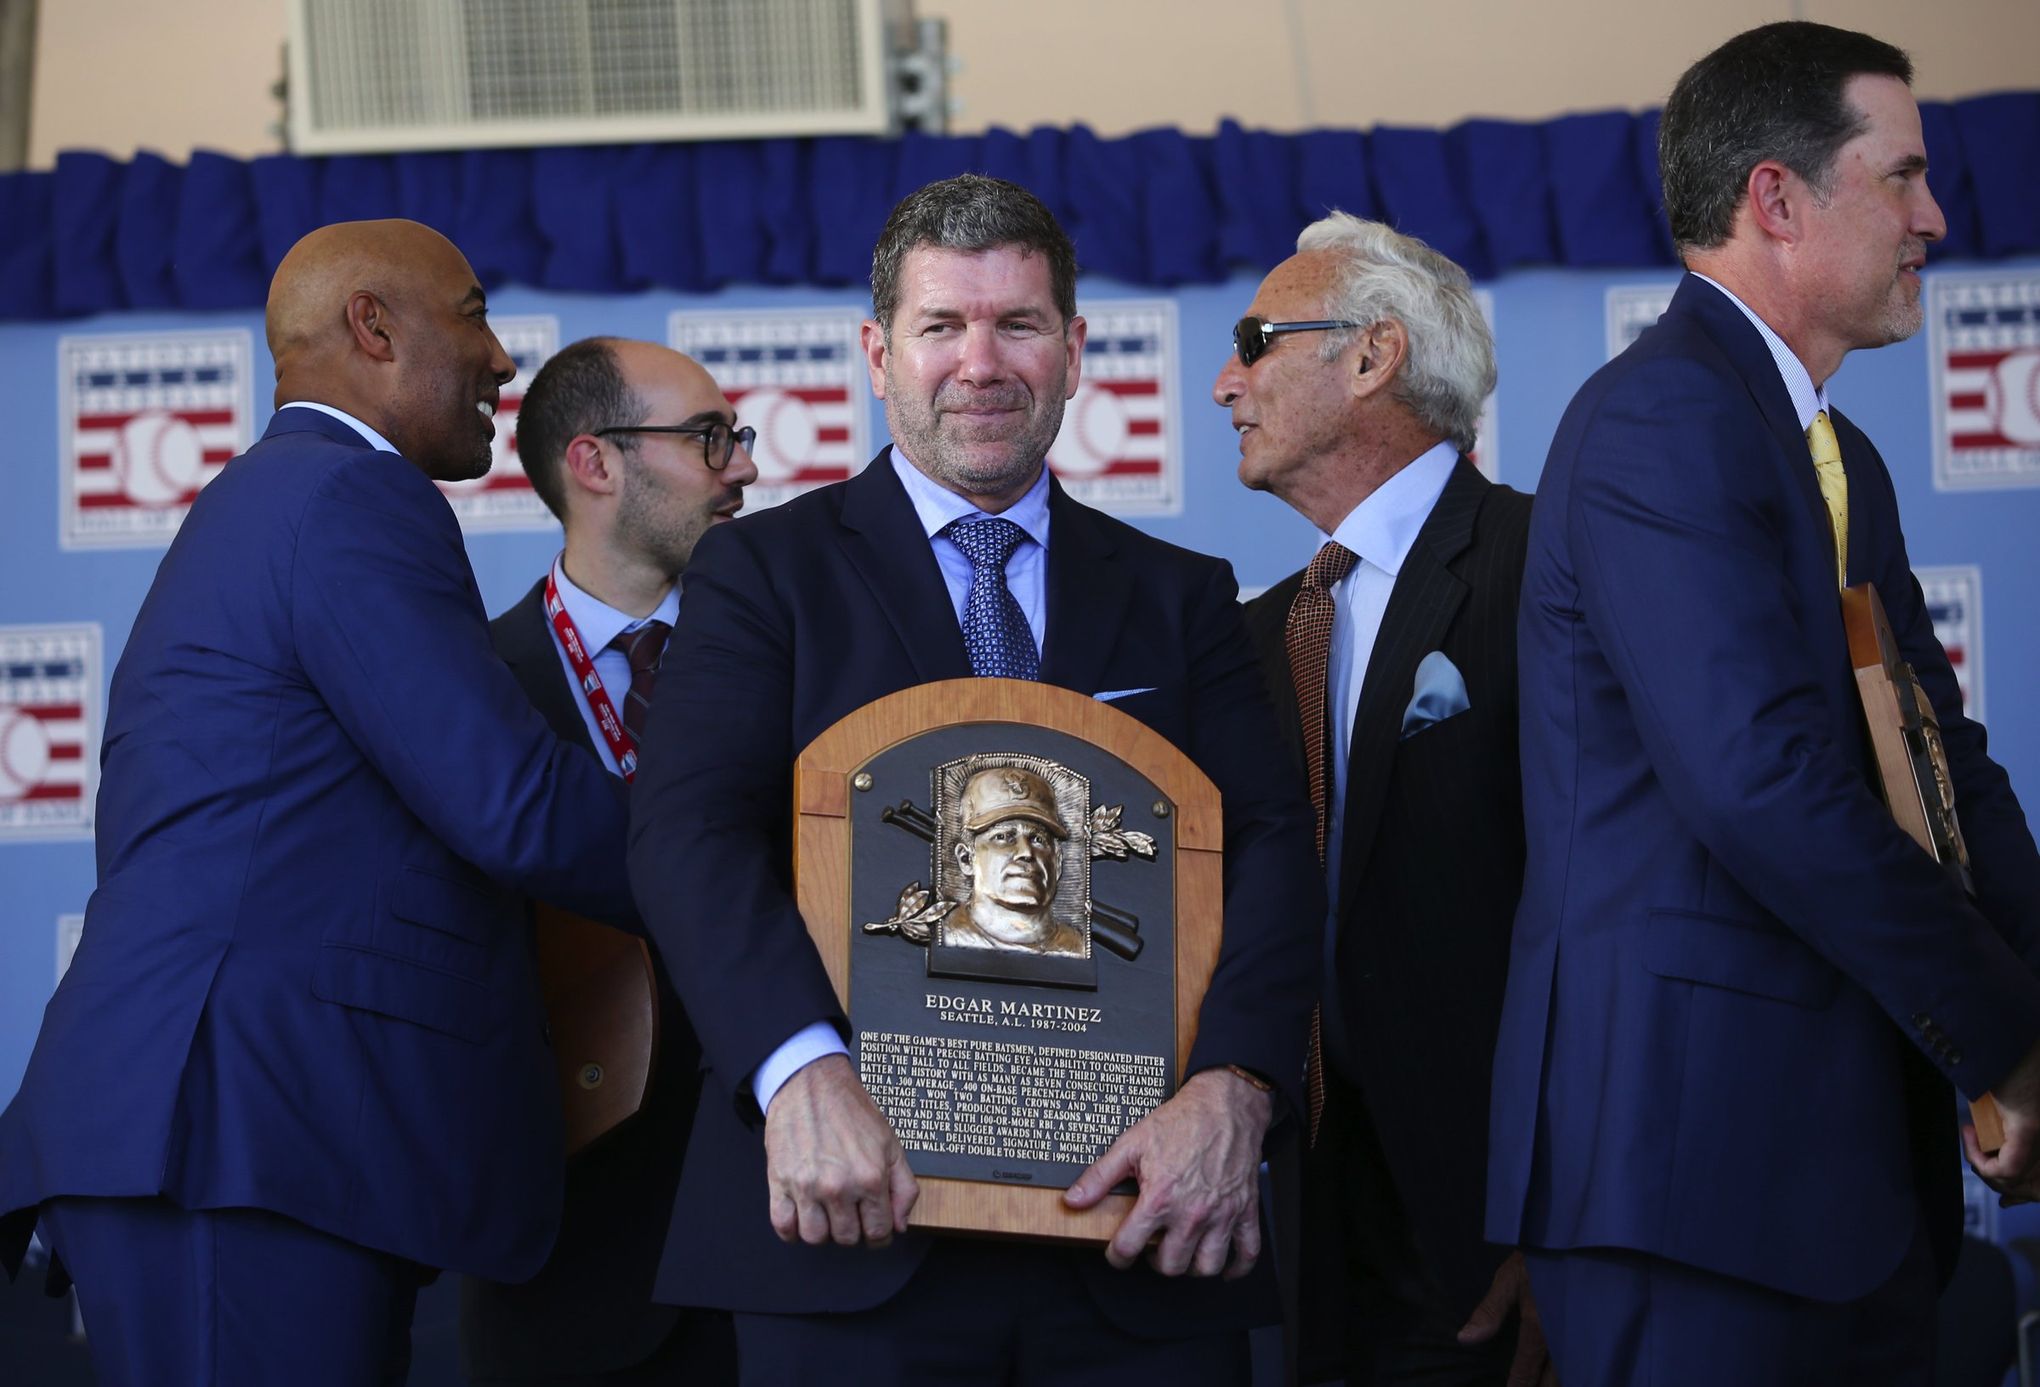 No team logo for Roy Halladay's plaque in Hall of Fame, widow says